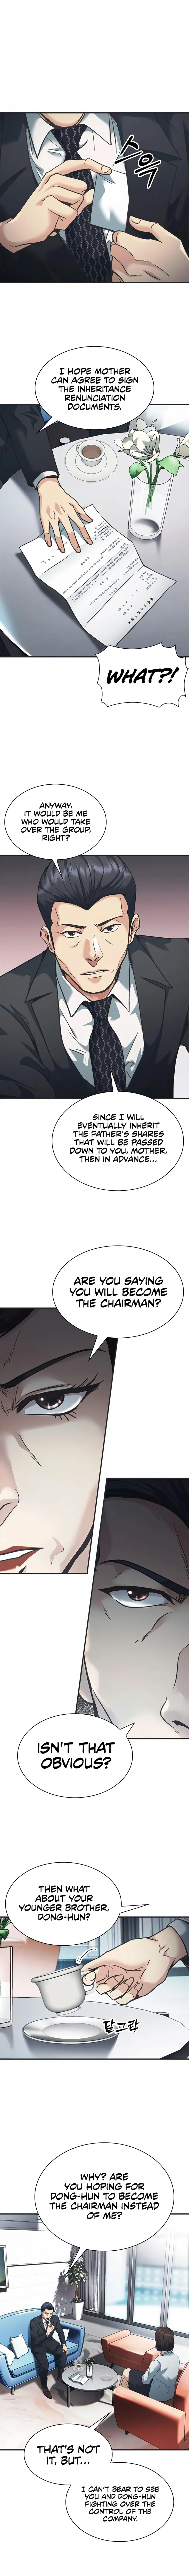 Chairman Kang: The Newcomer Chapter 25 page 13